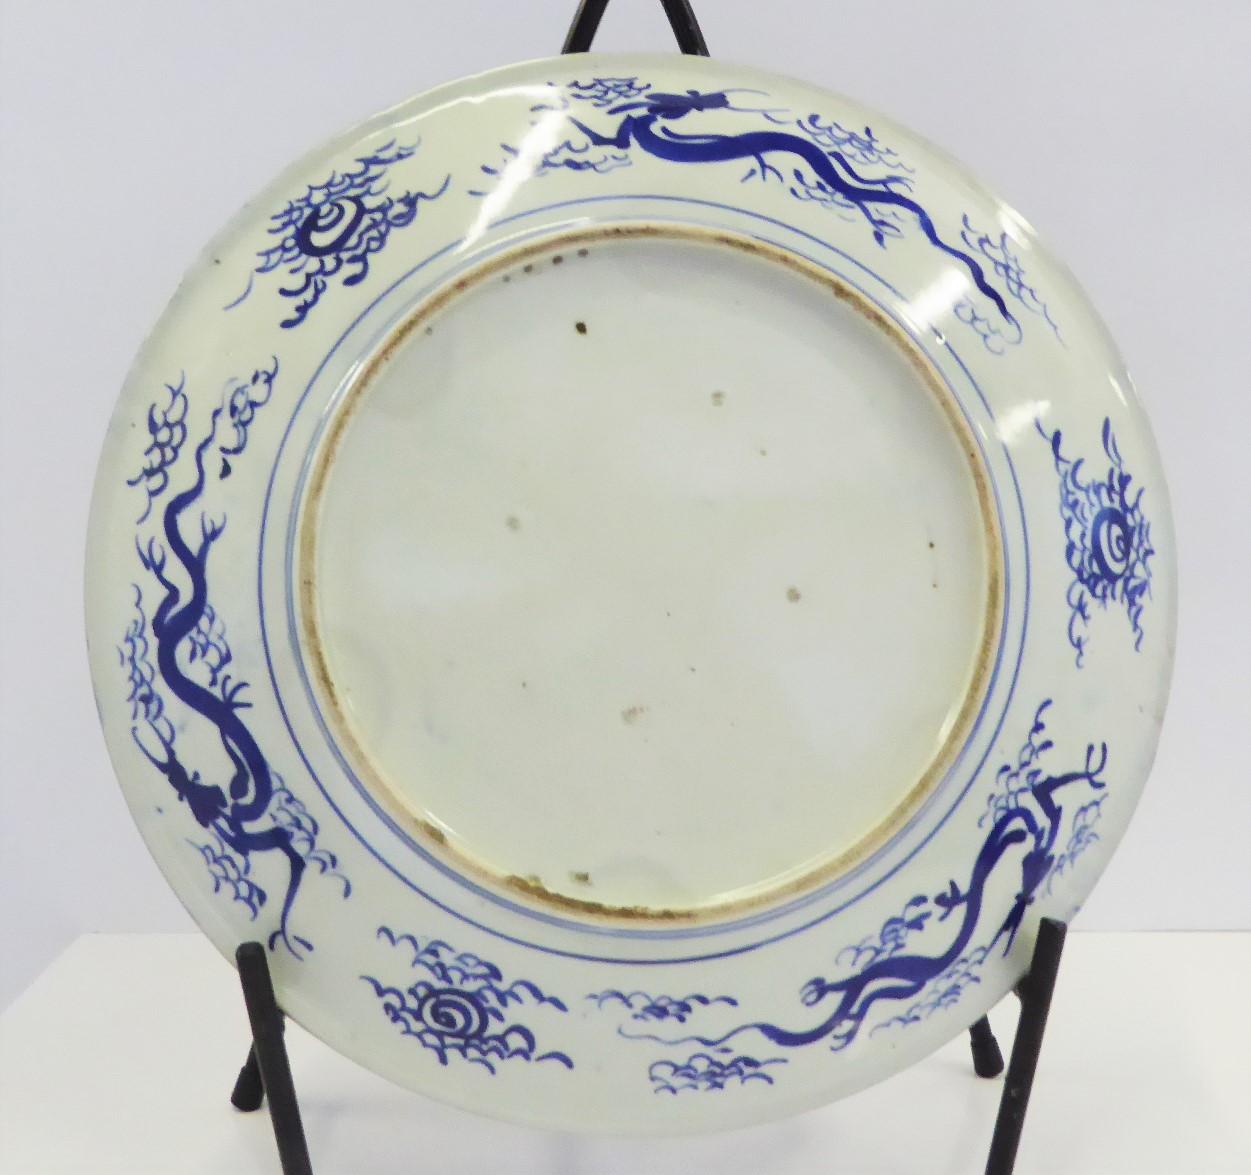 Pair of Antique Japanese Imari Blue White Chargers with Geishas at Lake Side For Sale 3